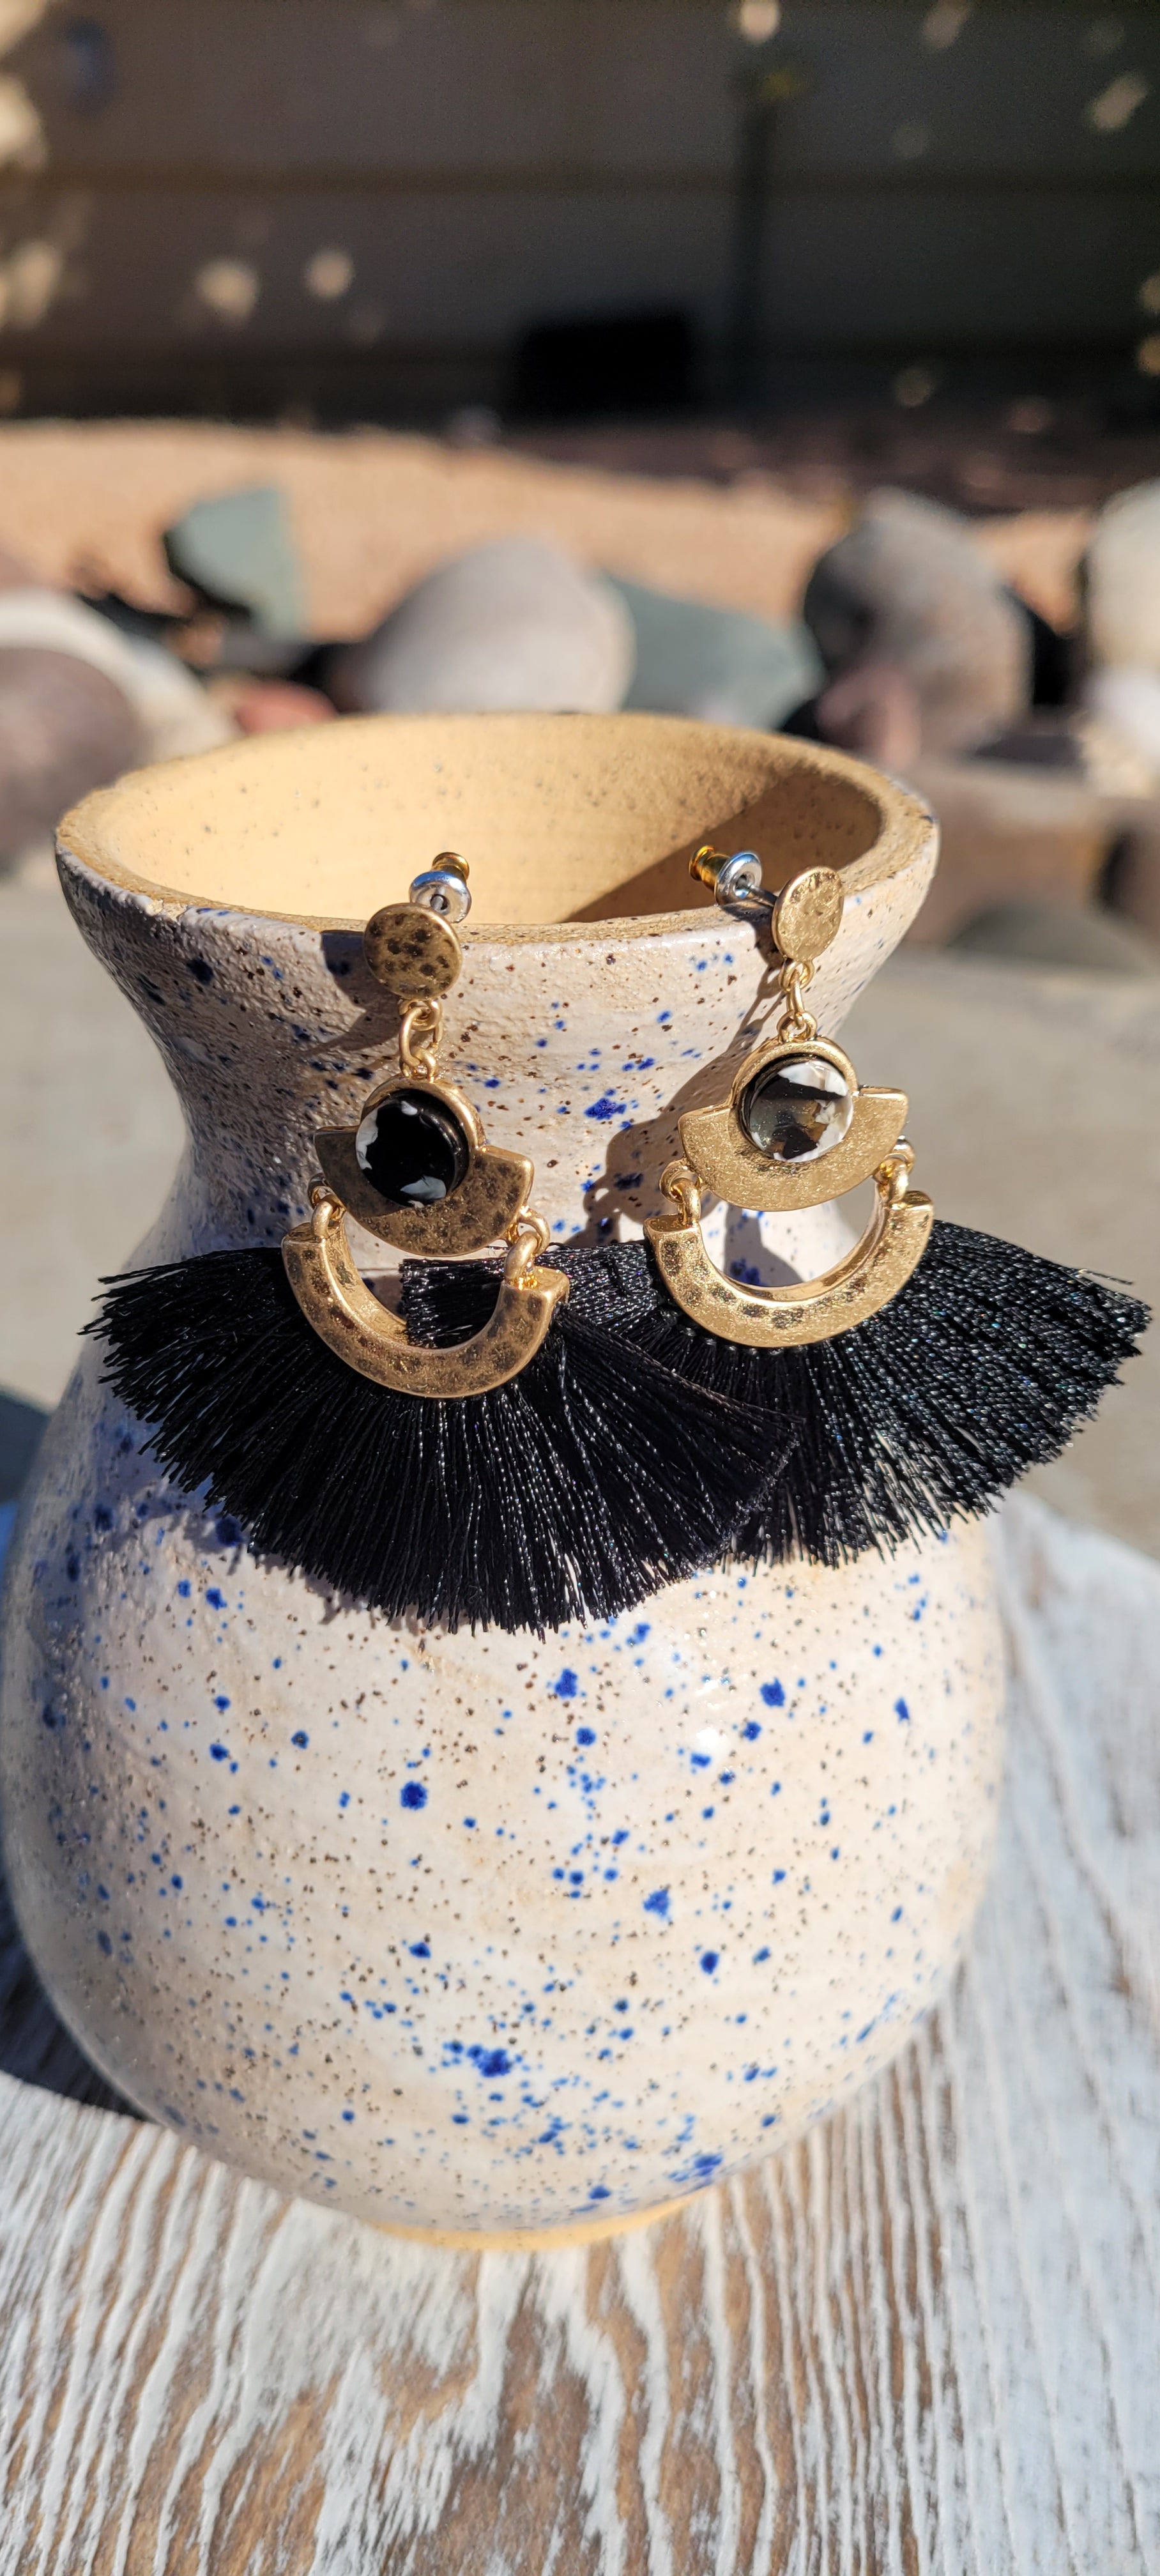 Black tassels Brushed gold dangle design Marbled jewel Brushed gold stud earrings Metal earring back Length 2”, width 2” Whether you want to be on the wild side or classy this earring set it will add a fun touch to your outfit